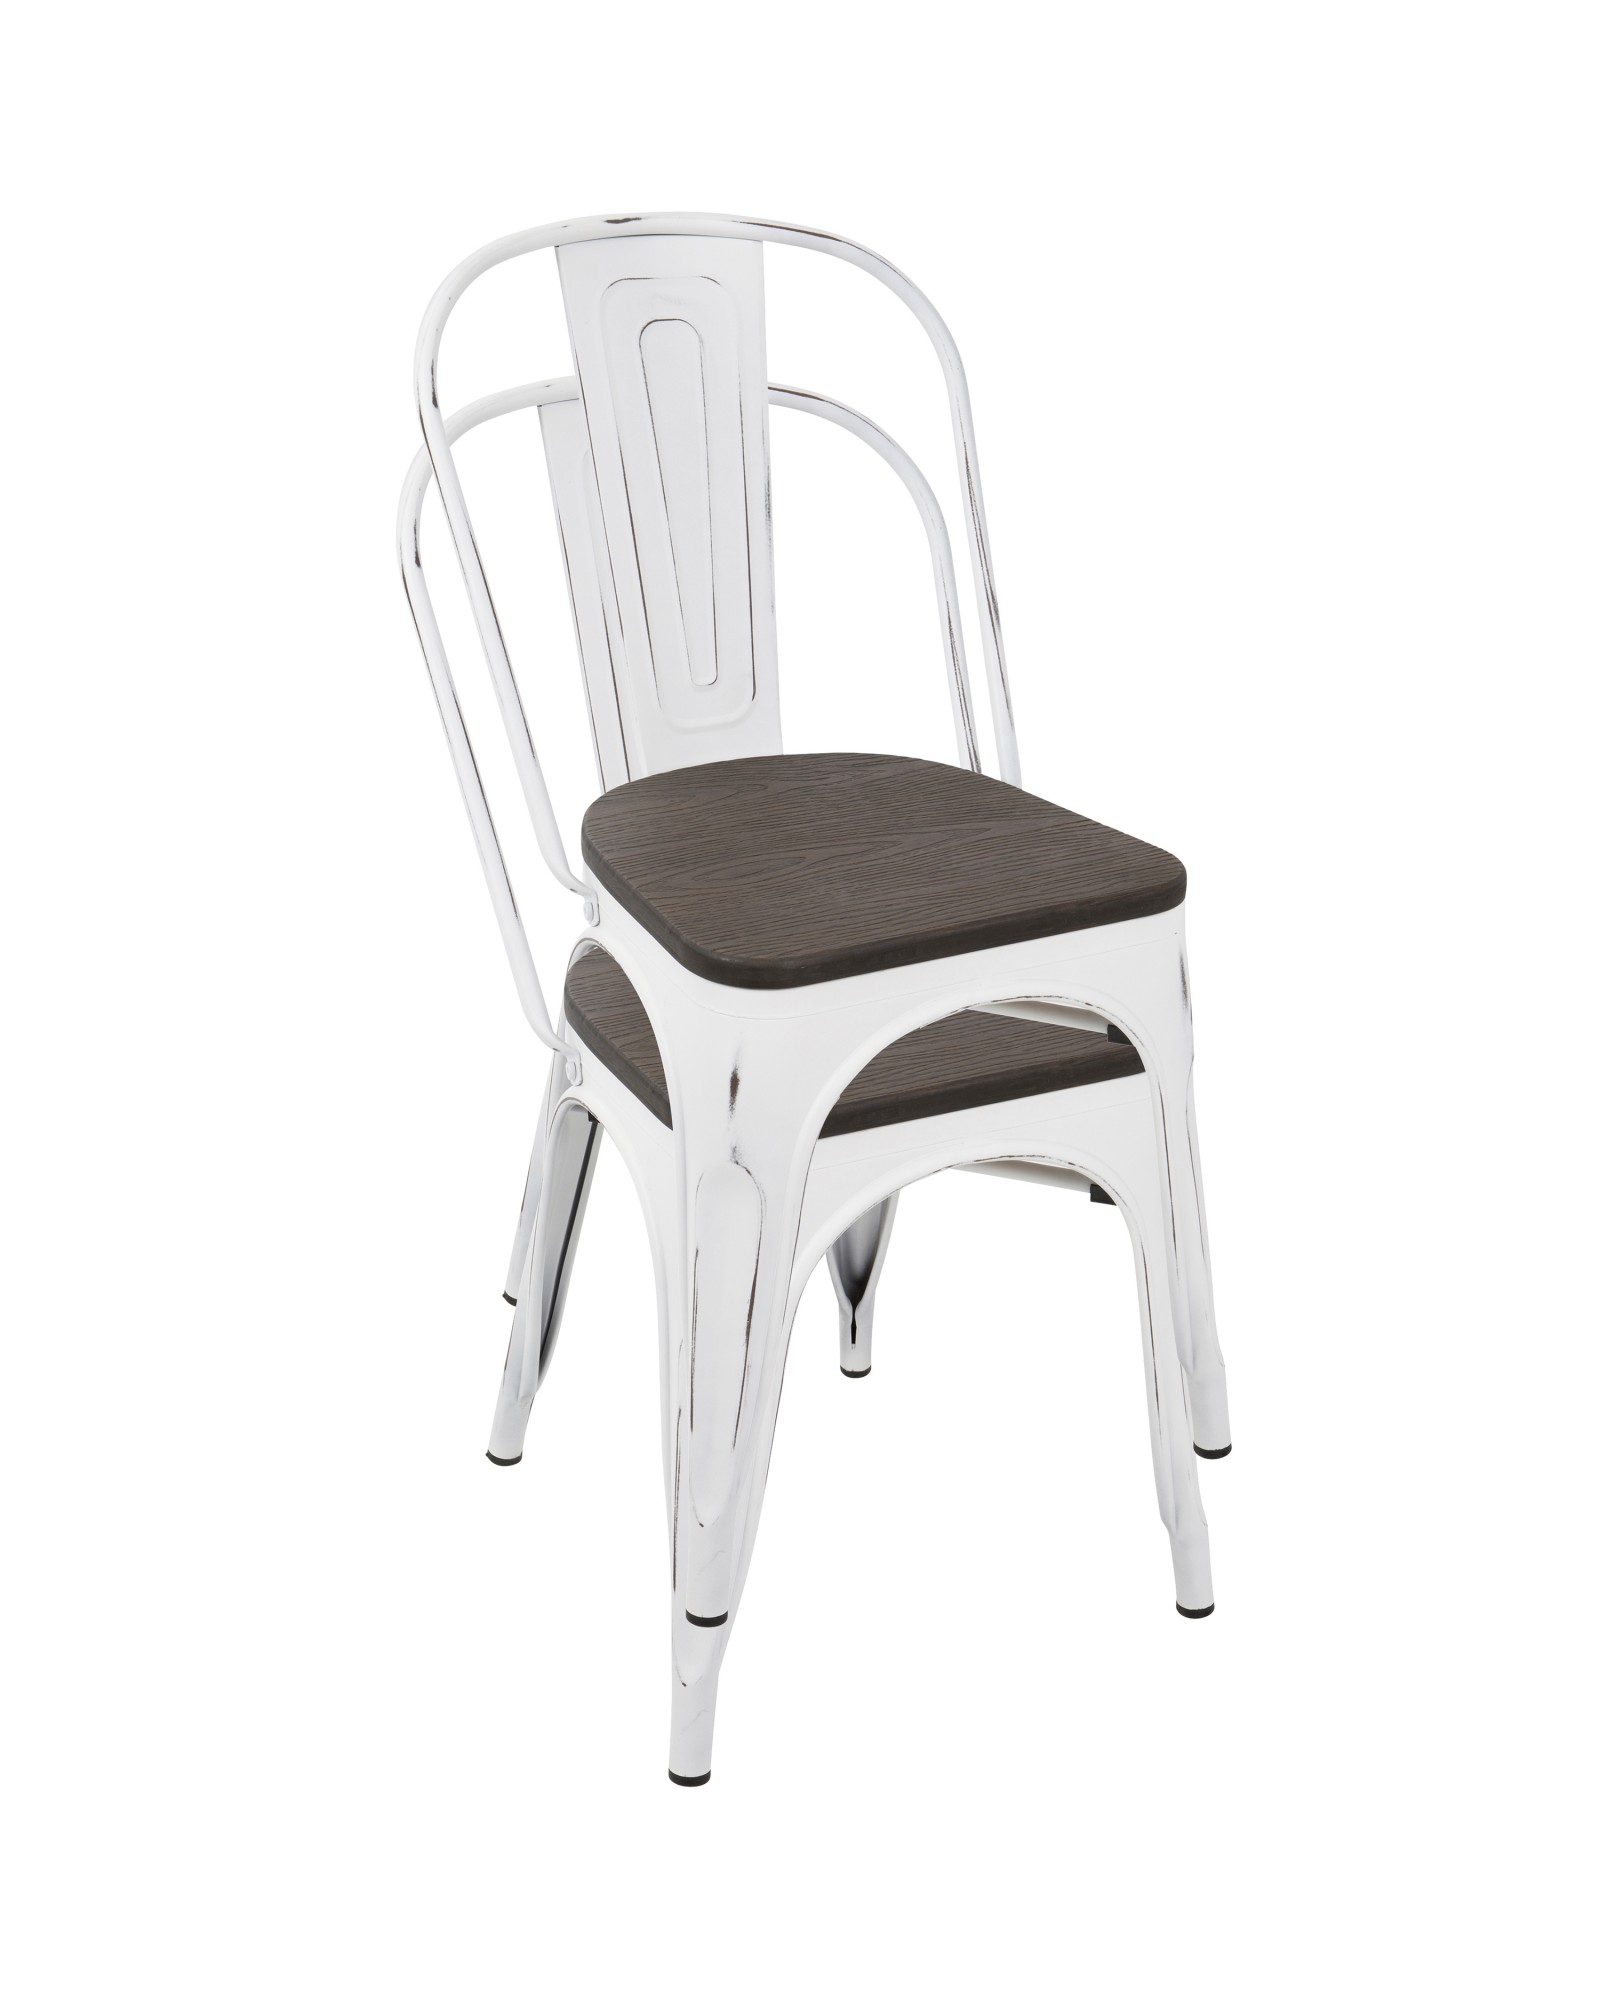 Oregon Industrial-Farmhouse Stackable Dining Chair in Vintage White and Espresso - Set of 2